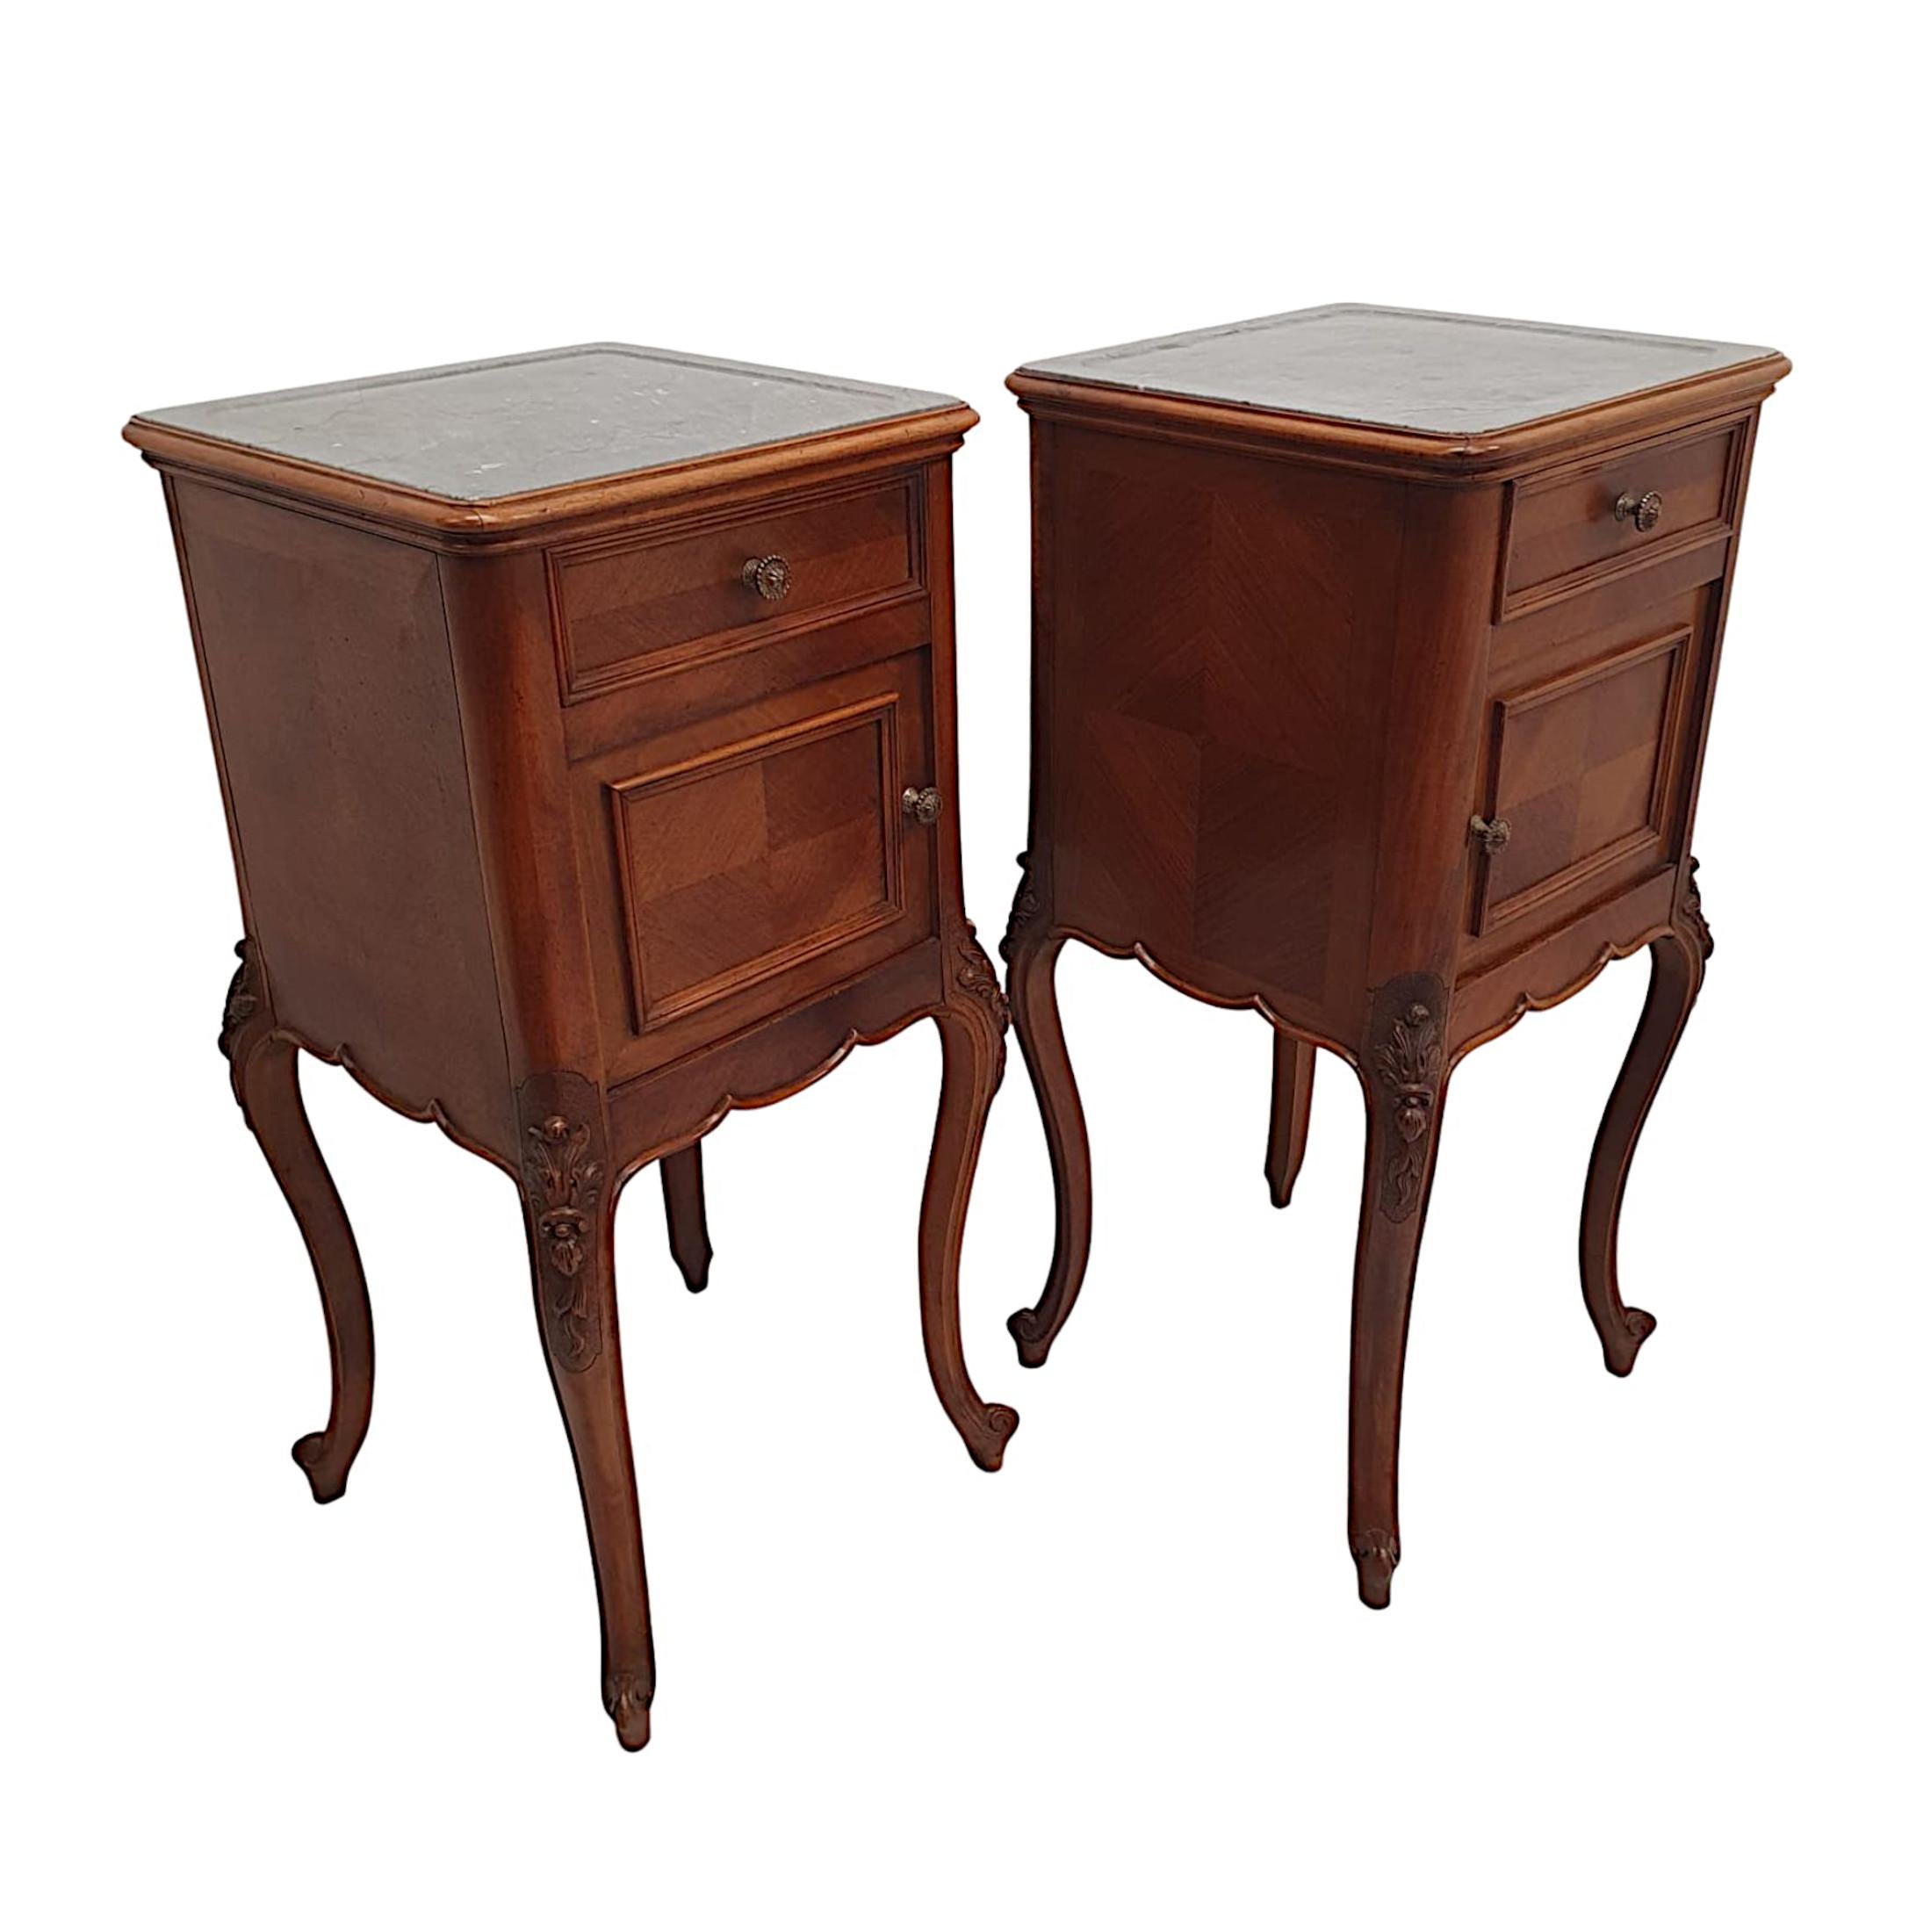 A fabulous pair of 19th Century marble top walnut and kingwood bedside tables, of superb quality and finely hand carved with rich patination and grain. The gorgeous, moulded grey marble top of square form is raised over single drawer above single